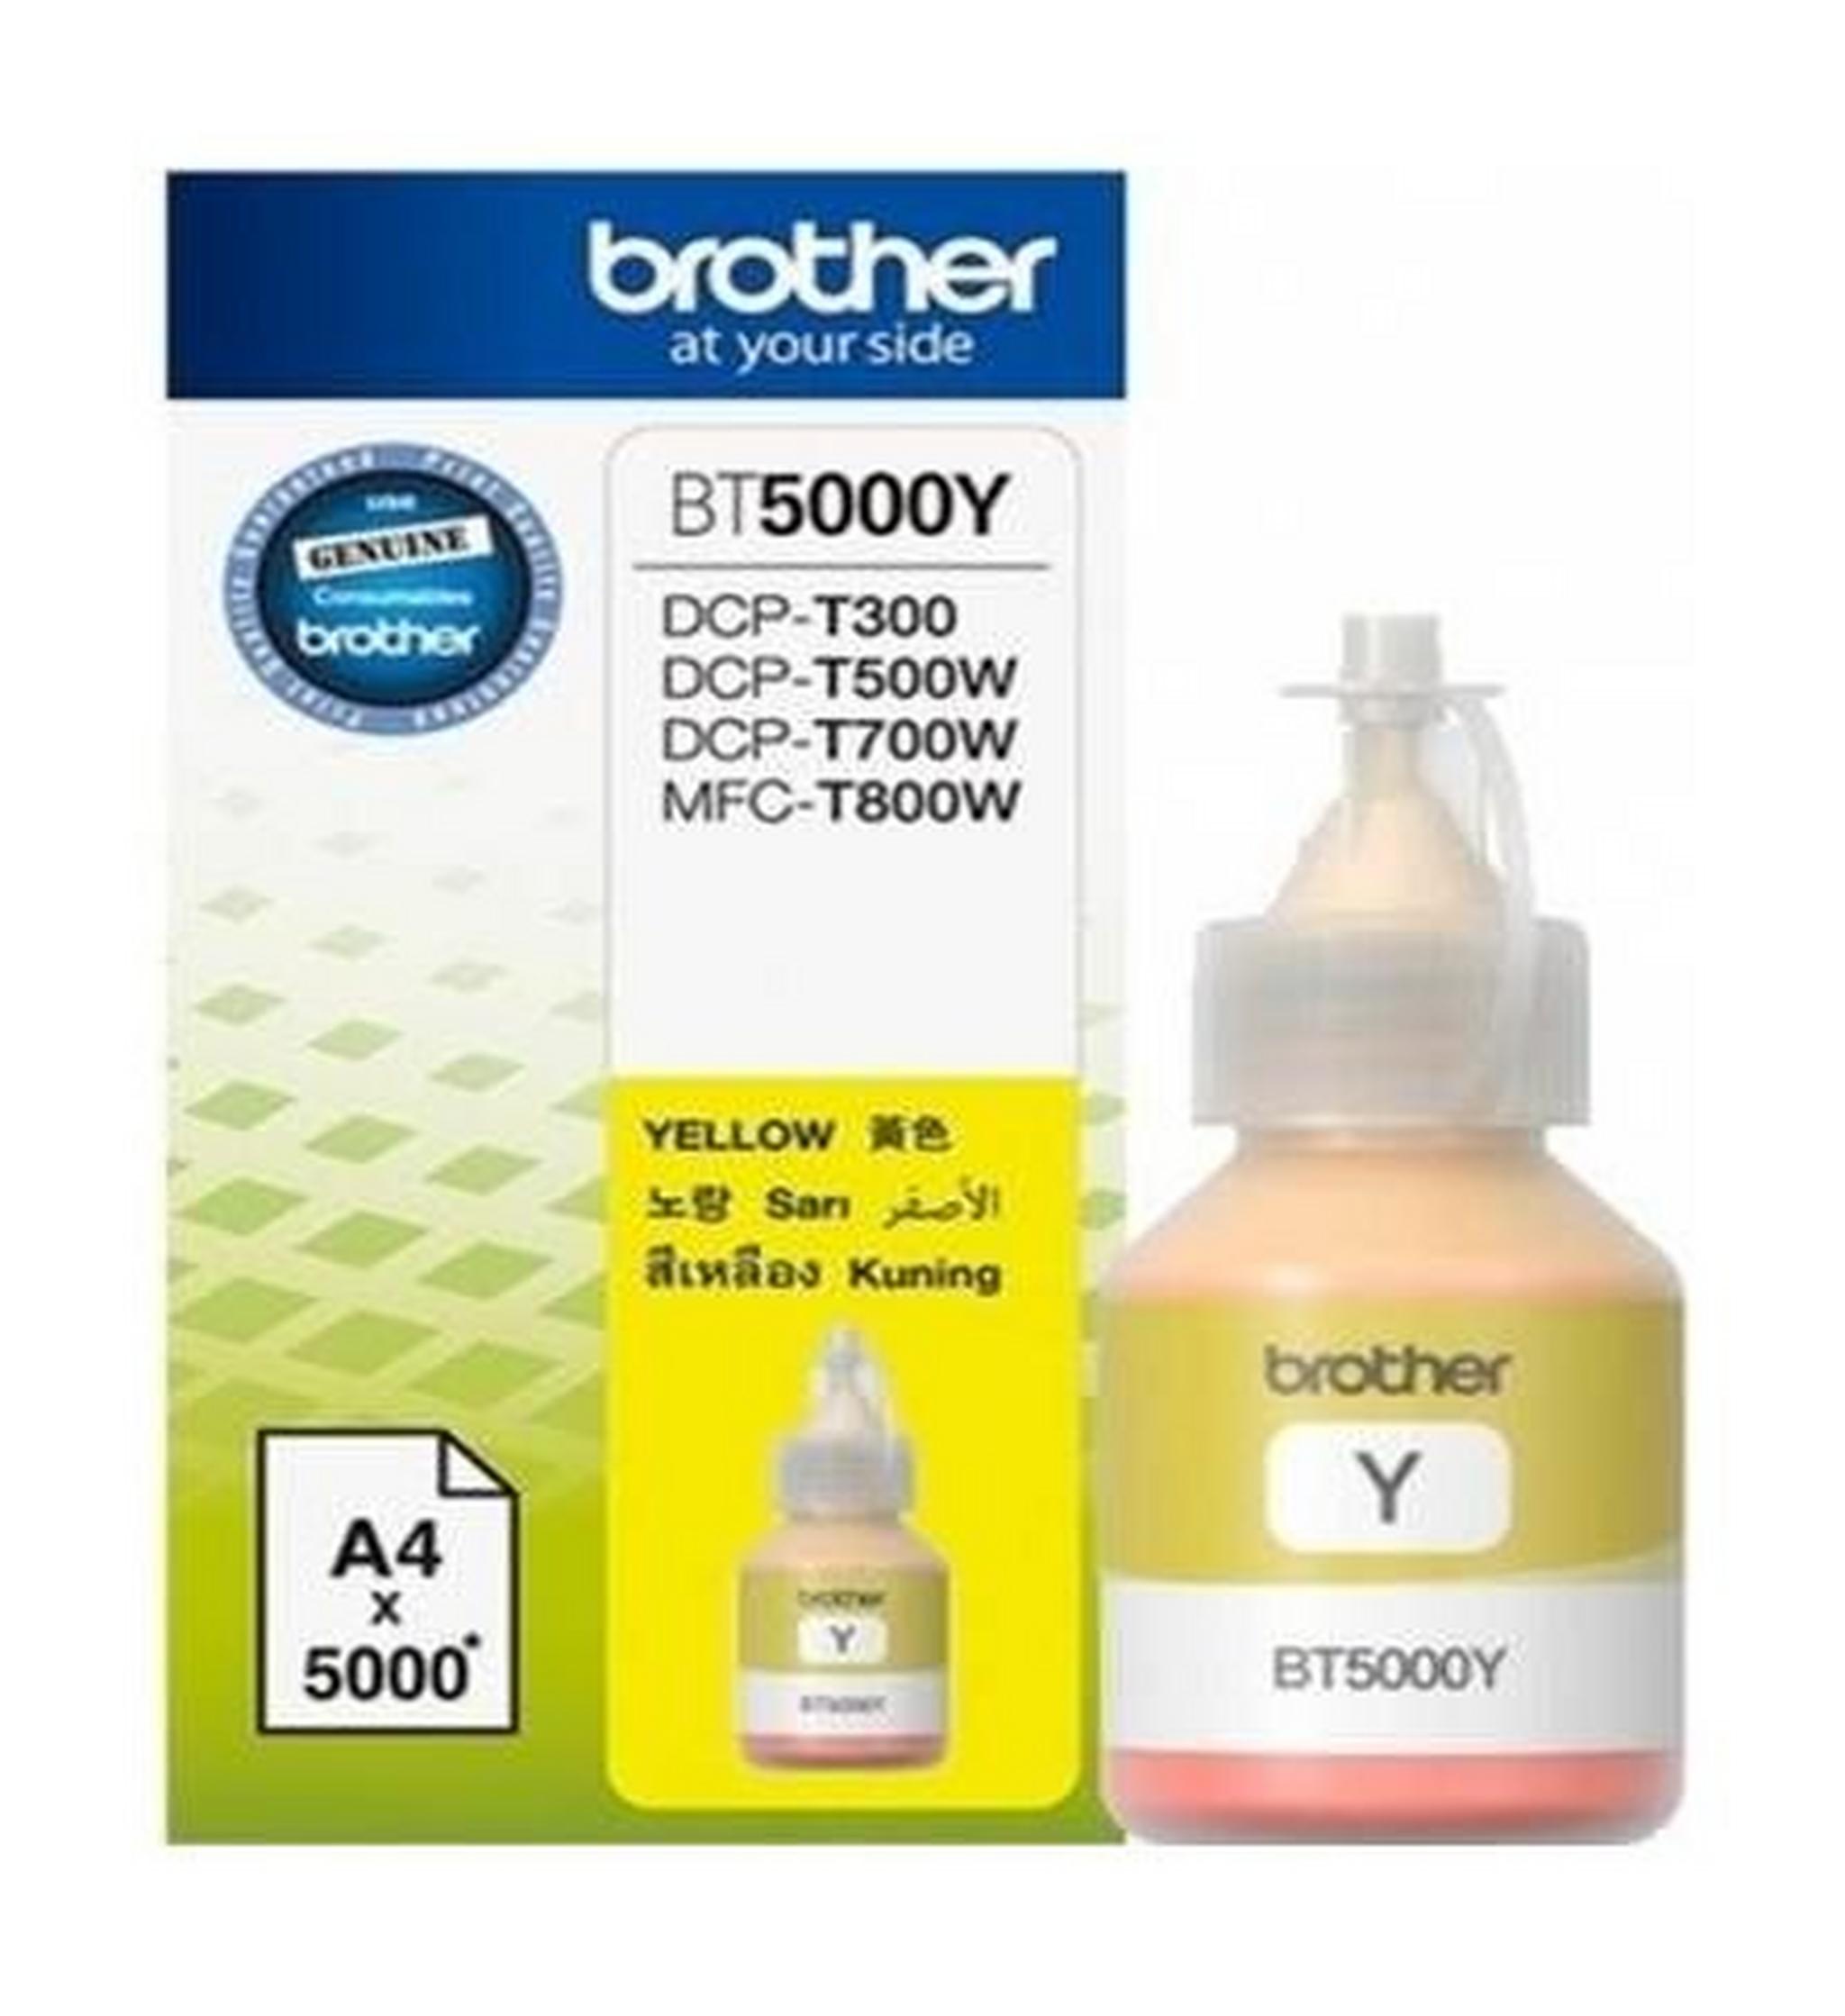 BROTHER Ink BT5000Y for Inkjet Printing 5000 Page Yield - Yellow (Single Colour Pack)